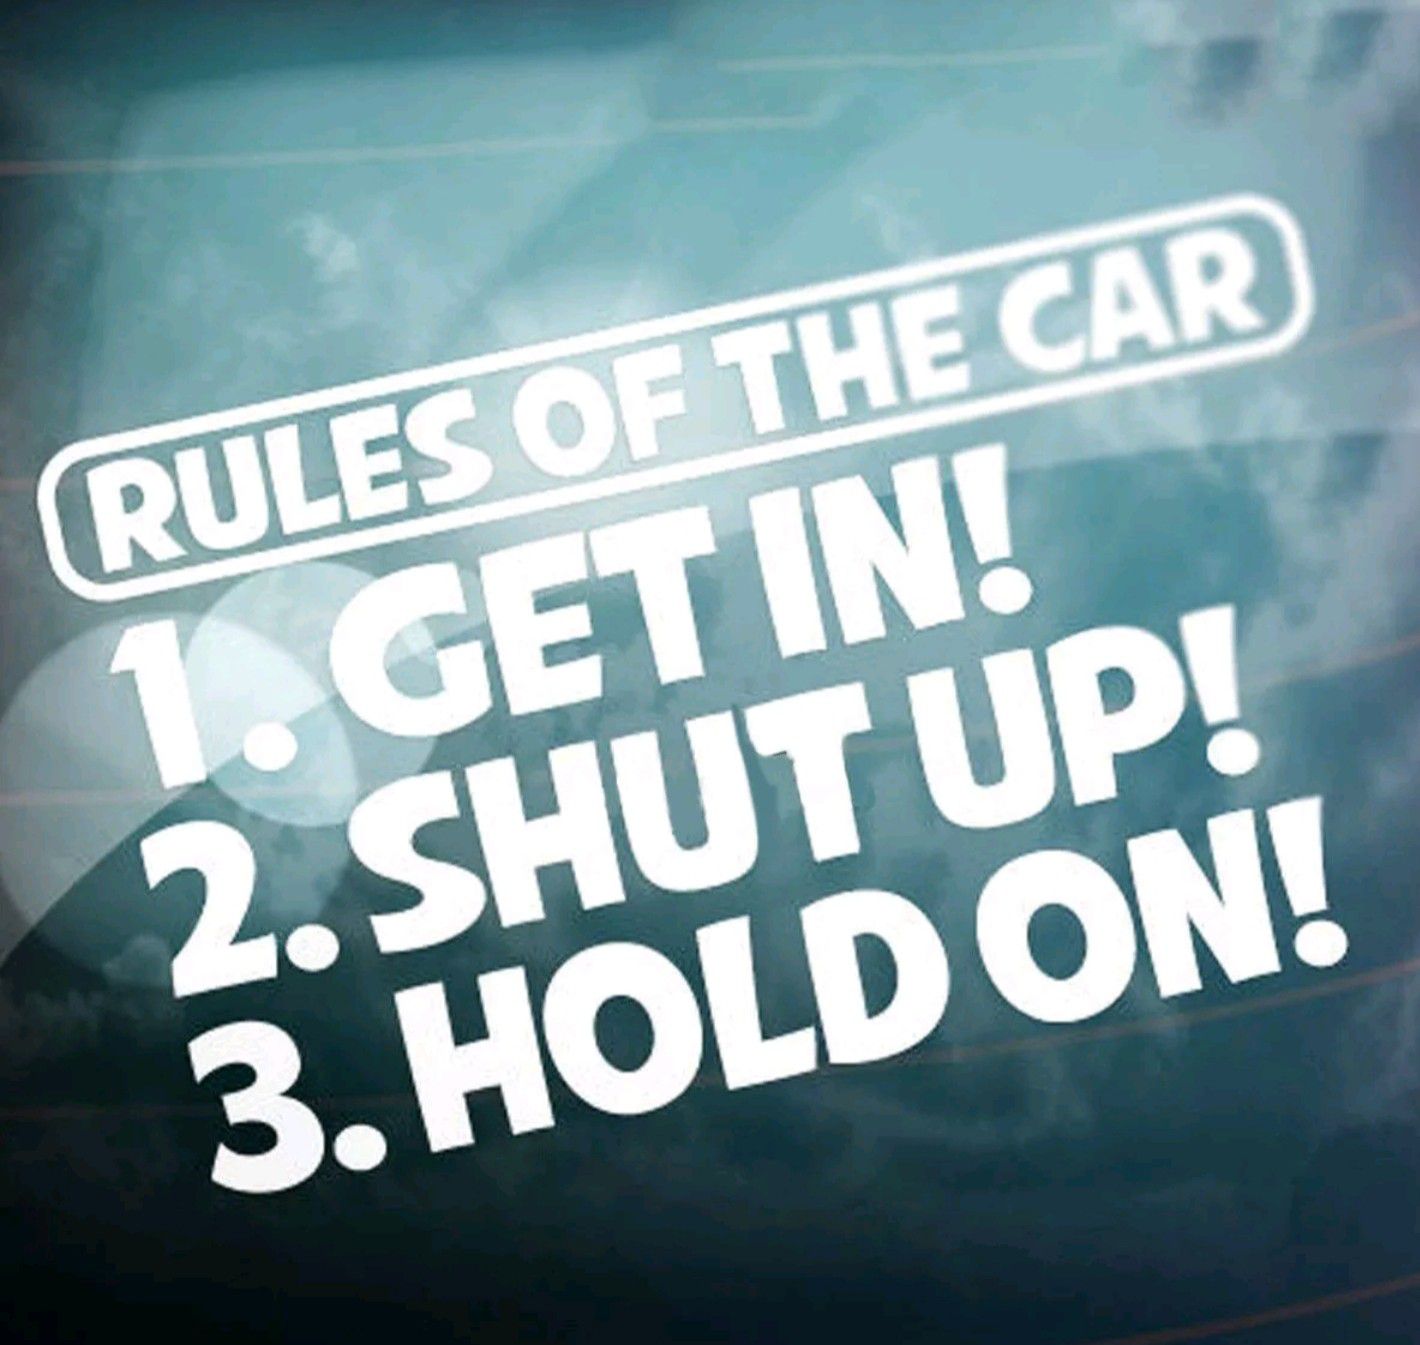 JDM "Rules of the car" decal